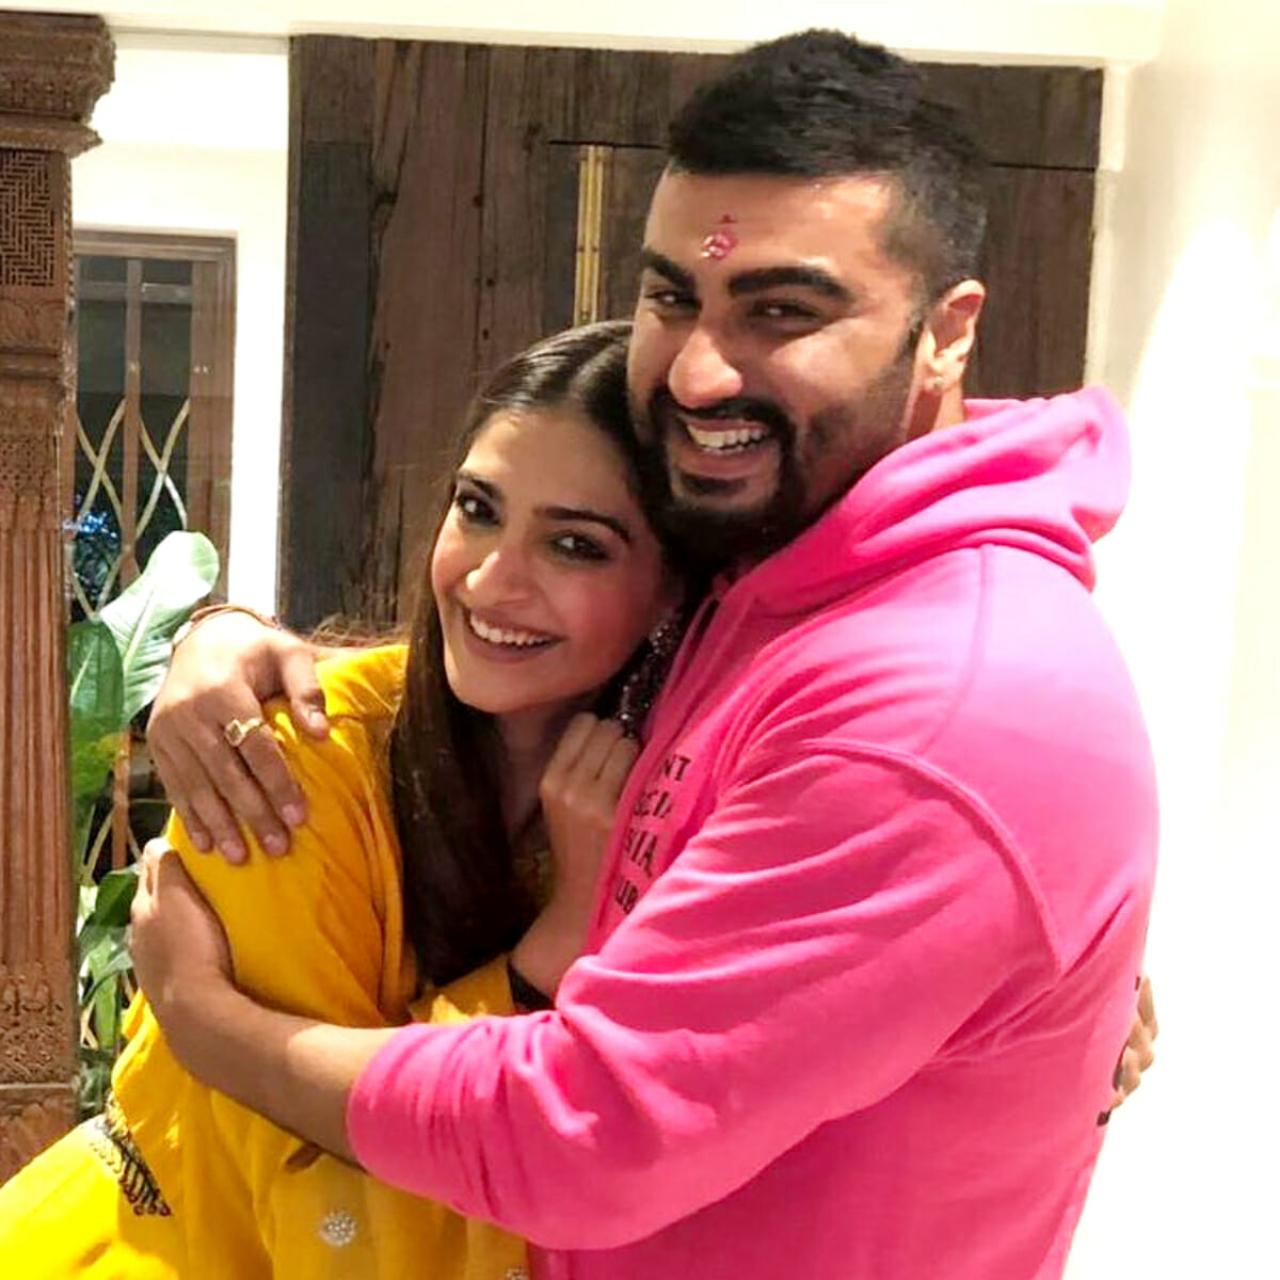 When Sonam revealed her brothers have slept with most of her friends
Sonam and Arjun played a fun sibling game on the show in which she was asked how many of her friends Arjun has slept with, Sonam answered saying, 